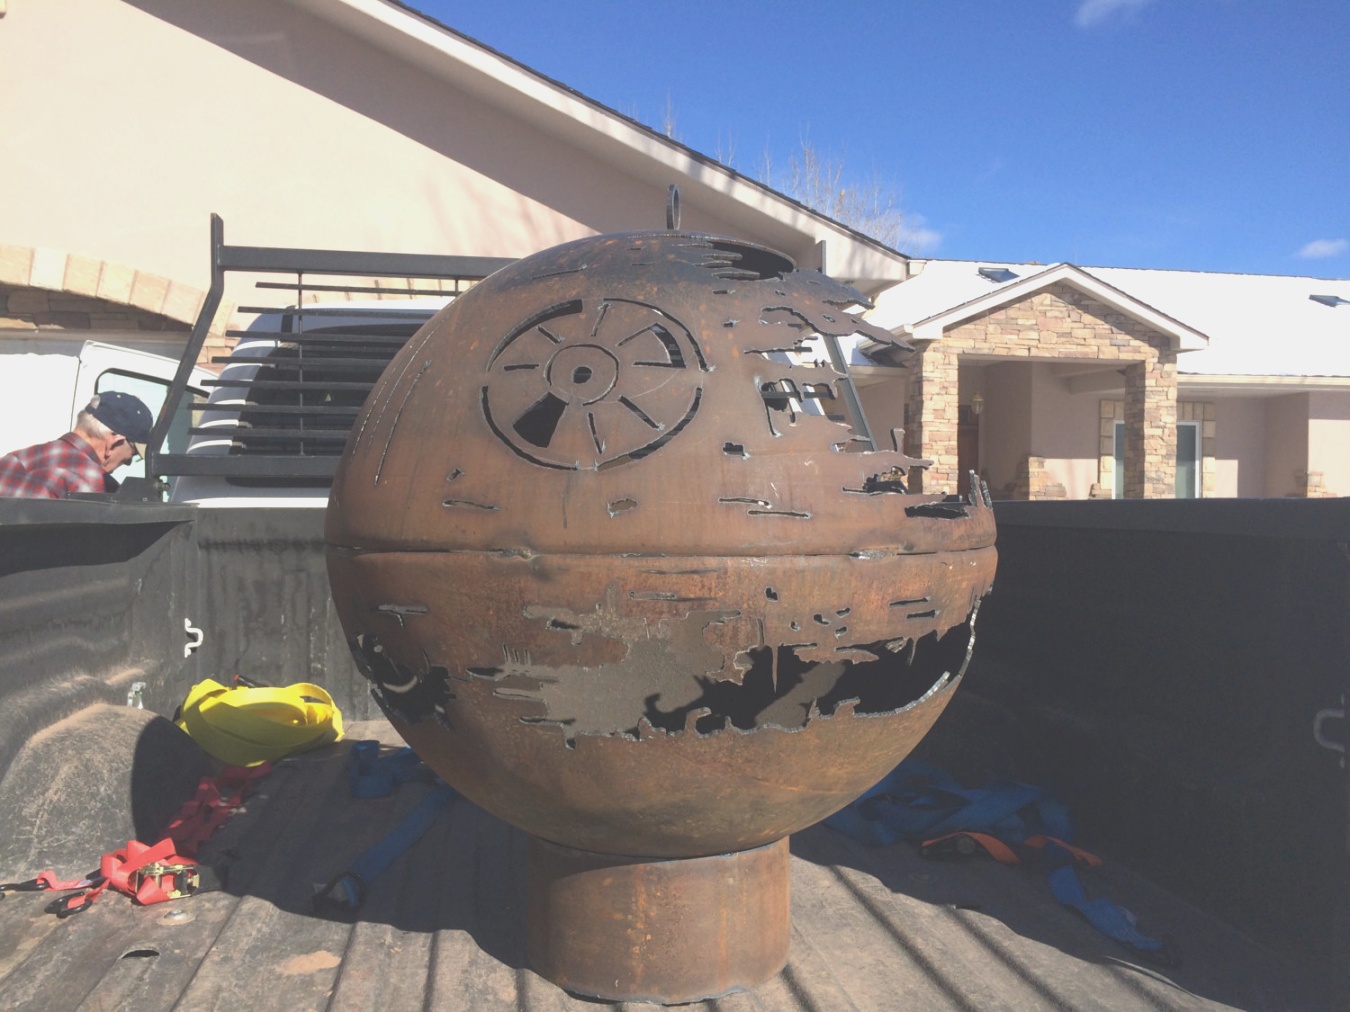 darth vader fire pit | Really Stick It to Darth Vader With This Death Star Fire Pit - Curbed | darth vader fire pit